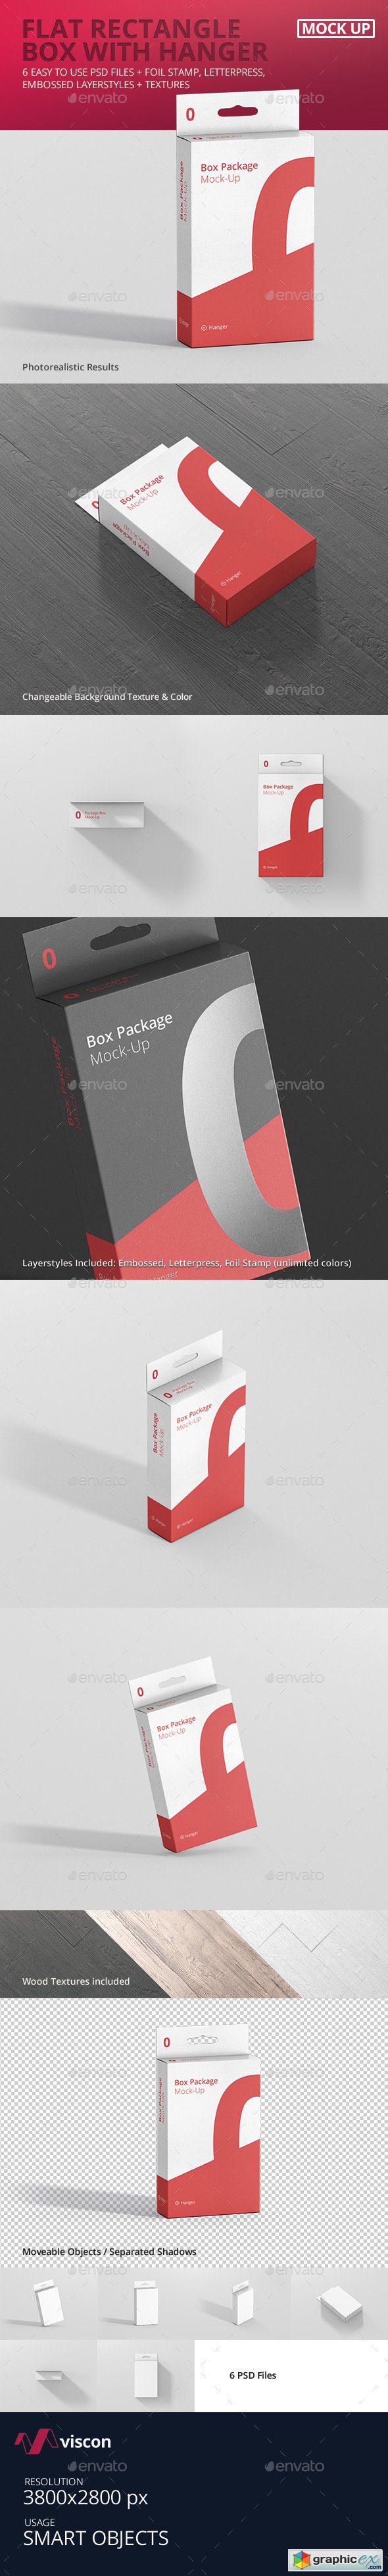 Package Box Mock-Up - Flat Rectangle with Hanger